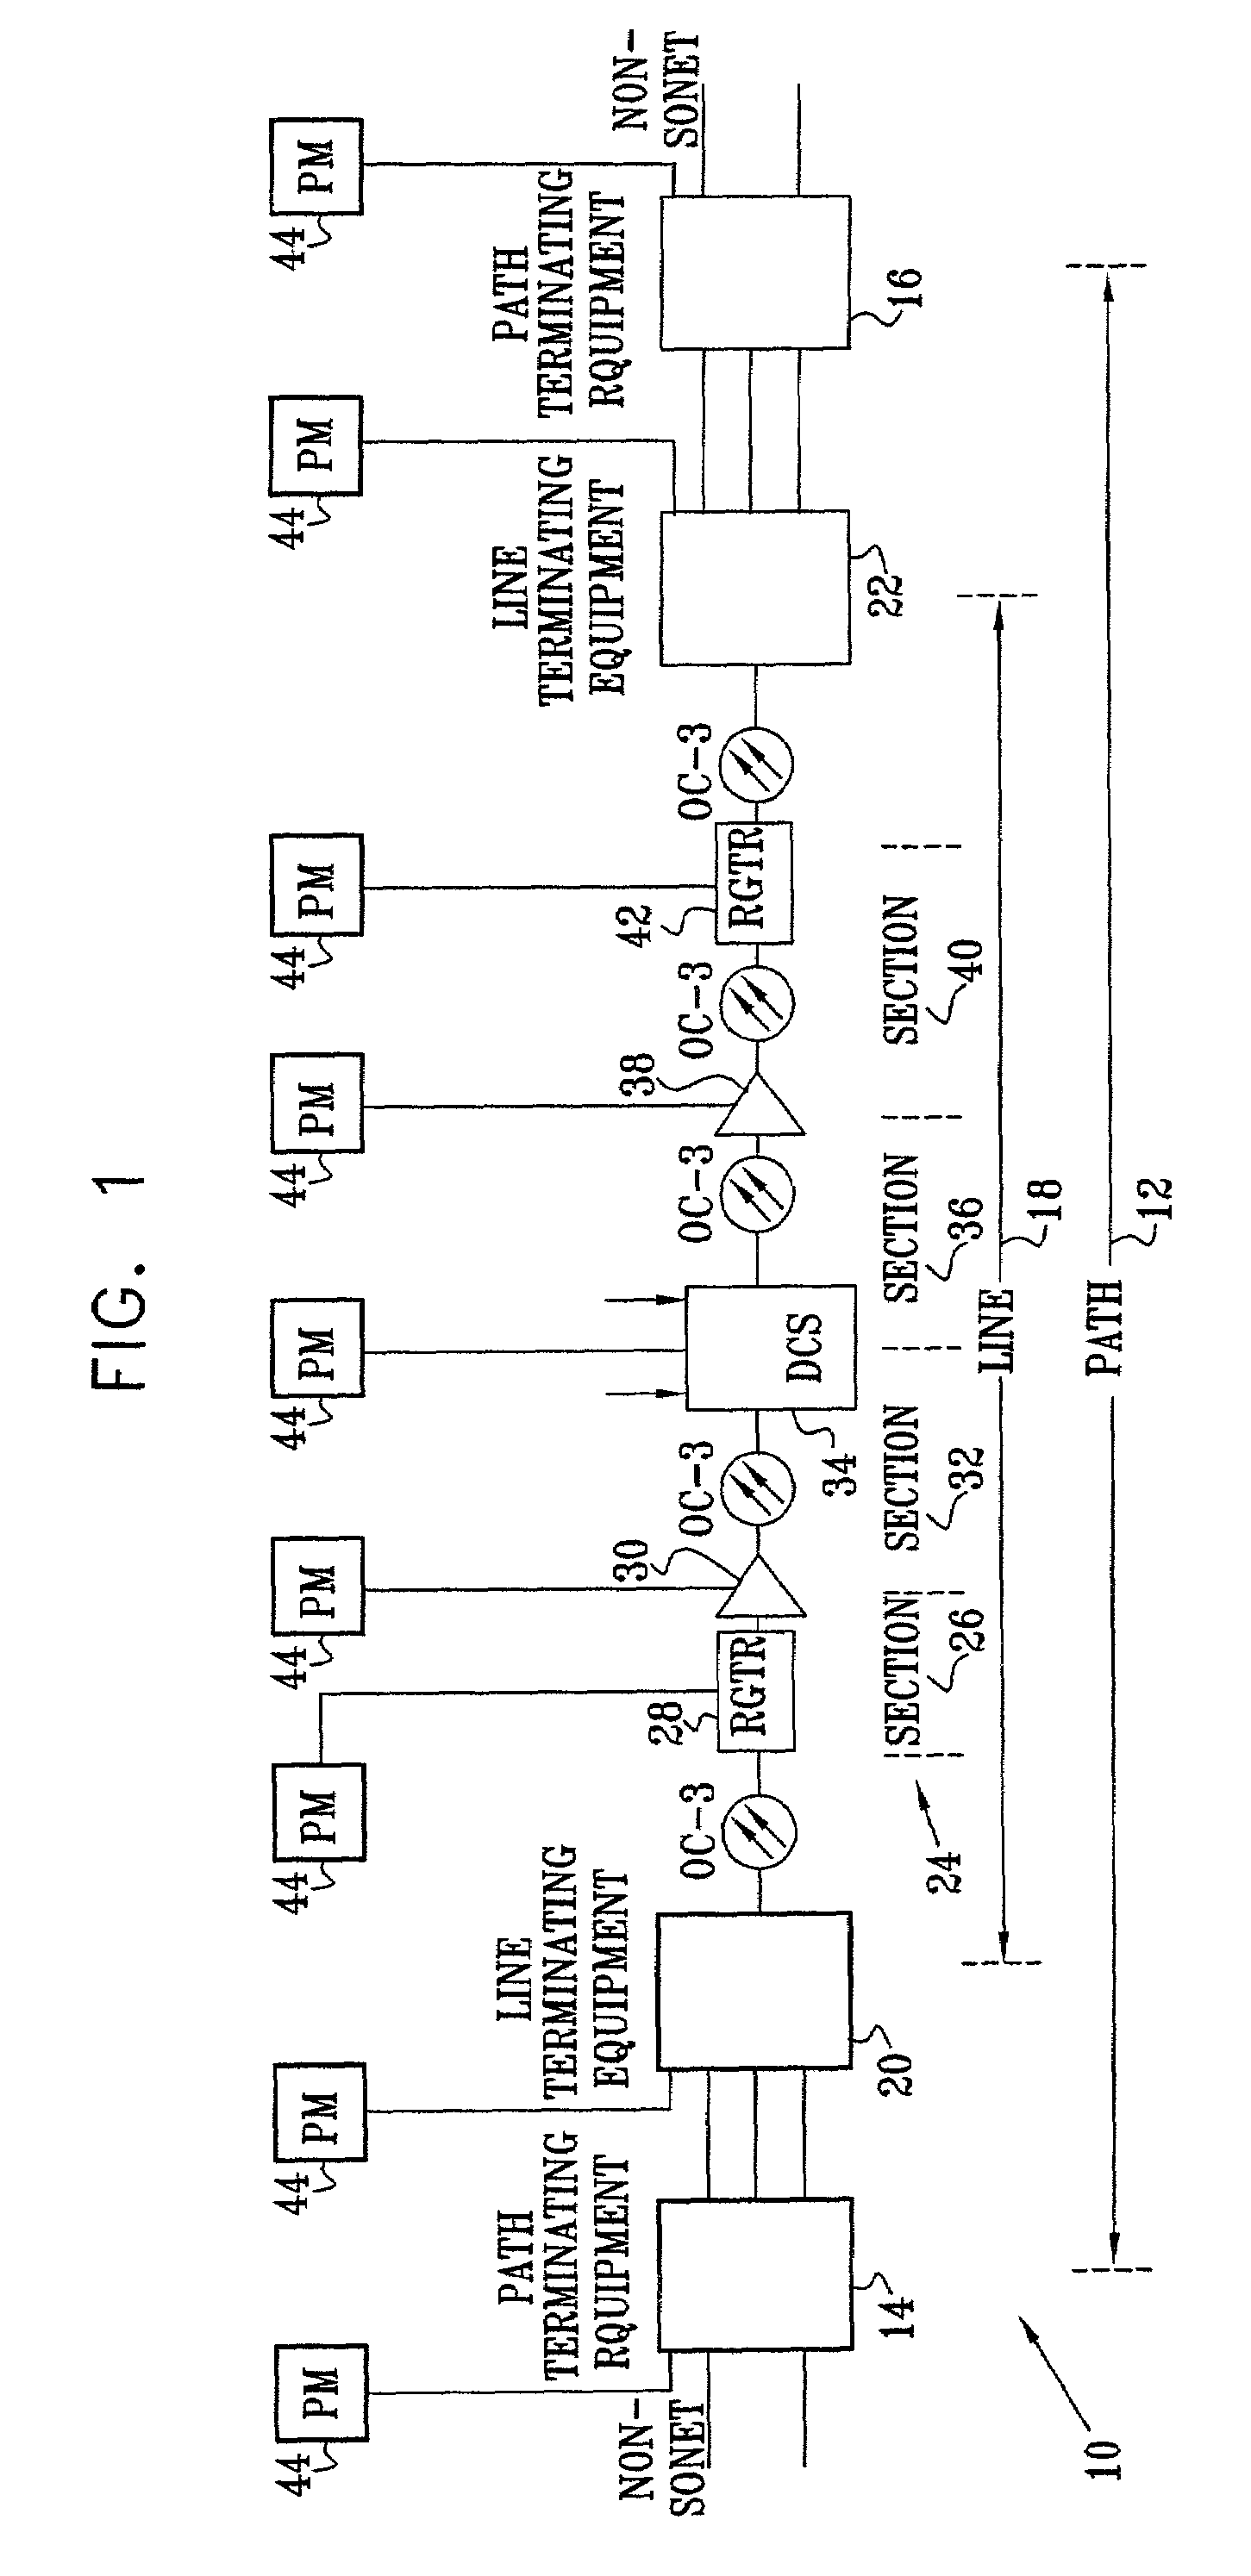 Performance monitoring of high speed communications networks